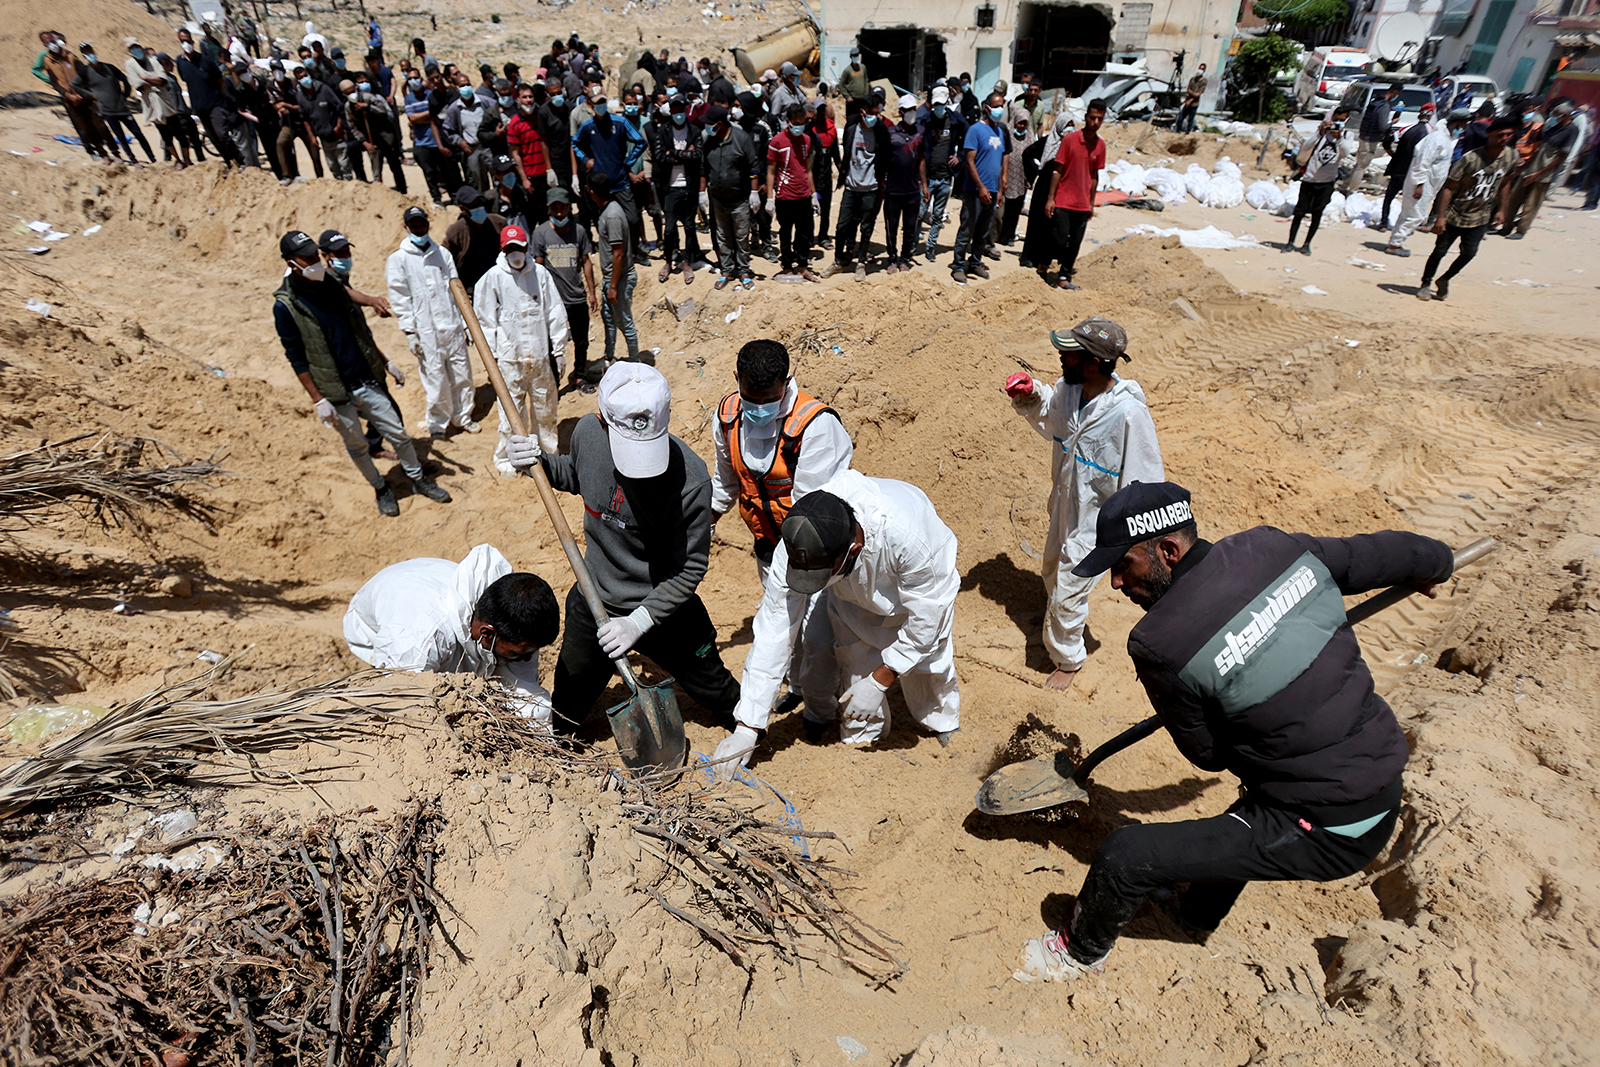 People work to move into a cemetery bodies of Palestinians killed during Israel's military offensive and buried at Nasser hospital in Khan Younis, Gaza, on April 21.